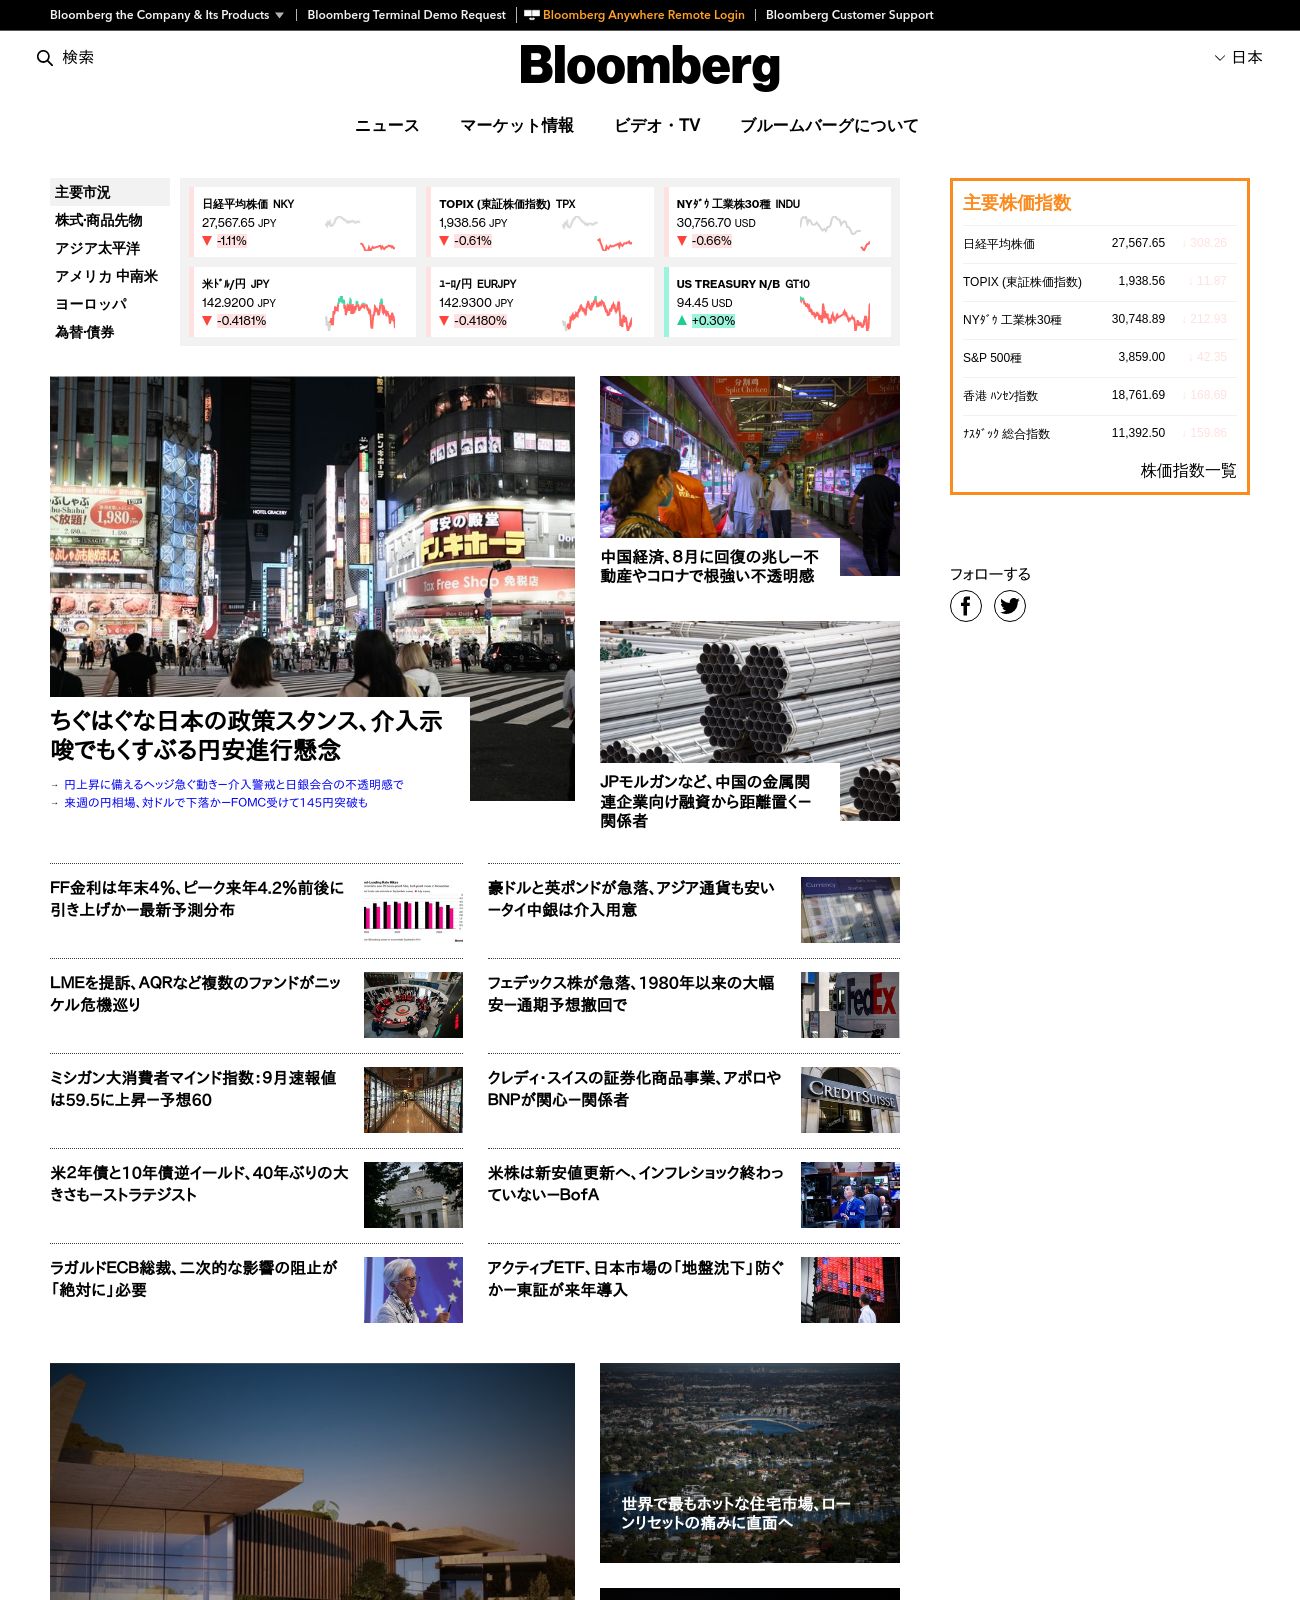 Bloomberg Japan at 2022-09-16 23:58:16+09:00 local time